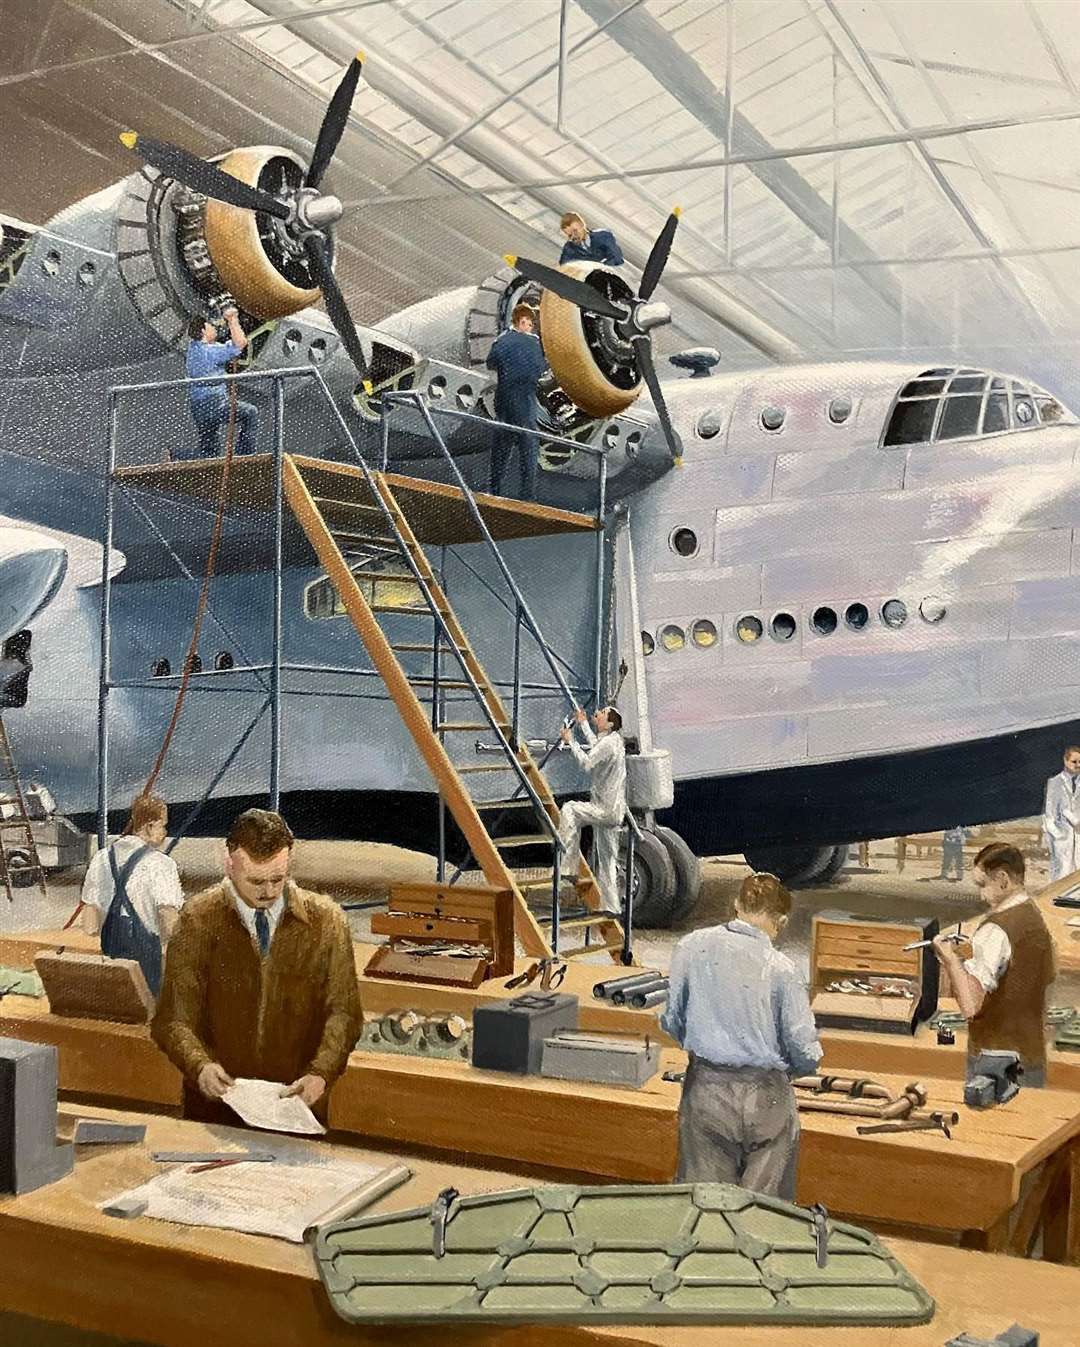 ‘Final assembly at Rochester’, by David Ellwood, depicts a Short Sunderland III nearing completion at Rochester Seaplane works, where 341 Sunderlands were built.